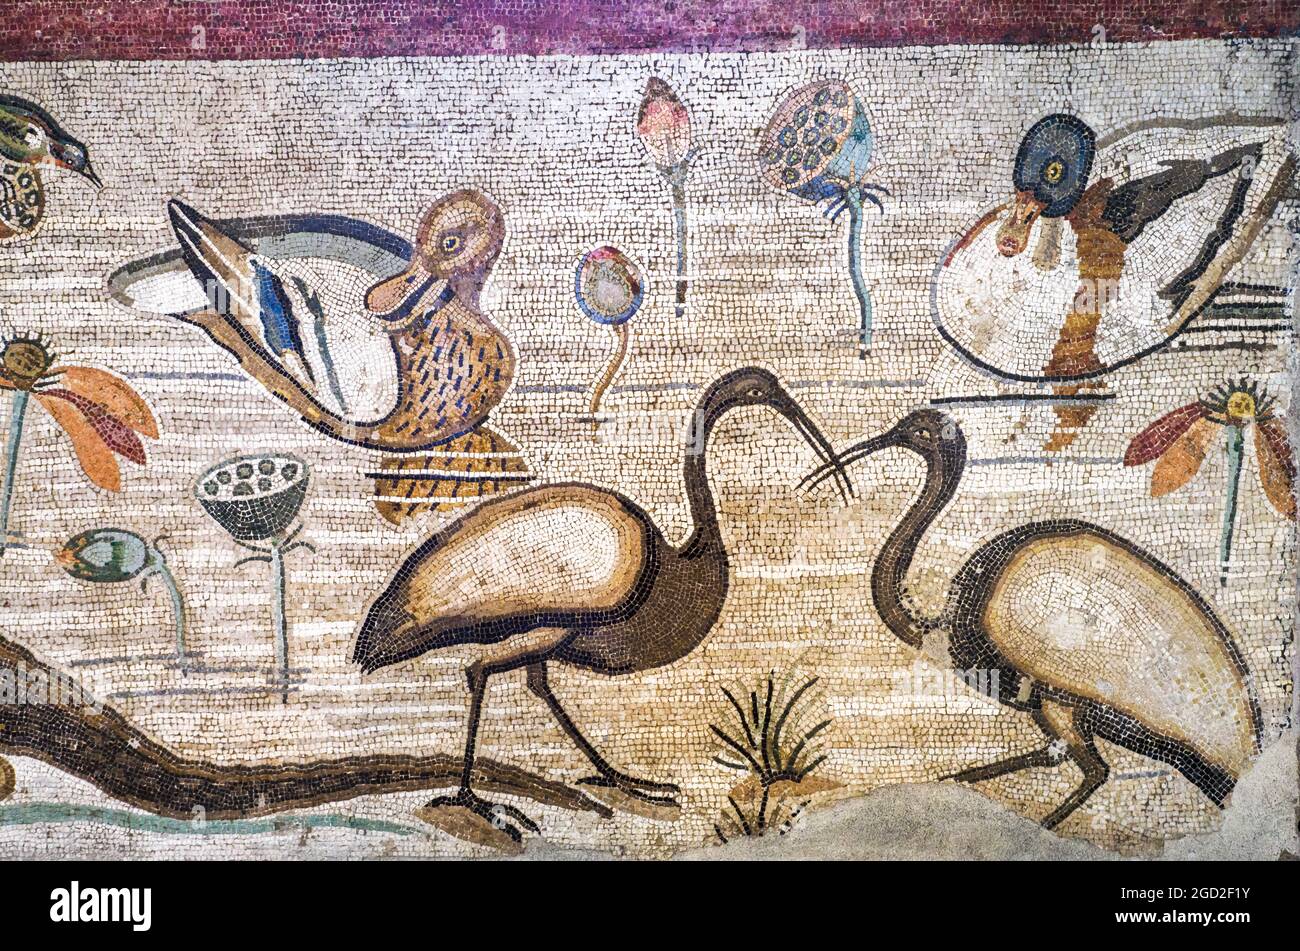 Nilotic scene detail Mosaic threshold in opus vermiculatum made from polychrome tesserae. situated in the central intercolumnation, the mosaic depicts Nilotic fauna with ibis and ducks swimming in the river among aquatic plants Pompeii, Casa del Fauno (House of the Faun) - Late 2nd - early 1st century BC Stock Photo